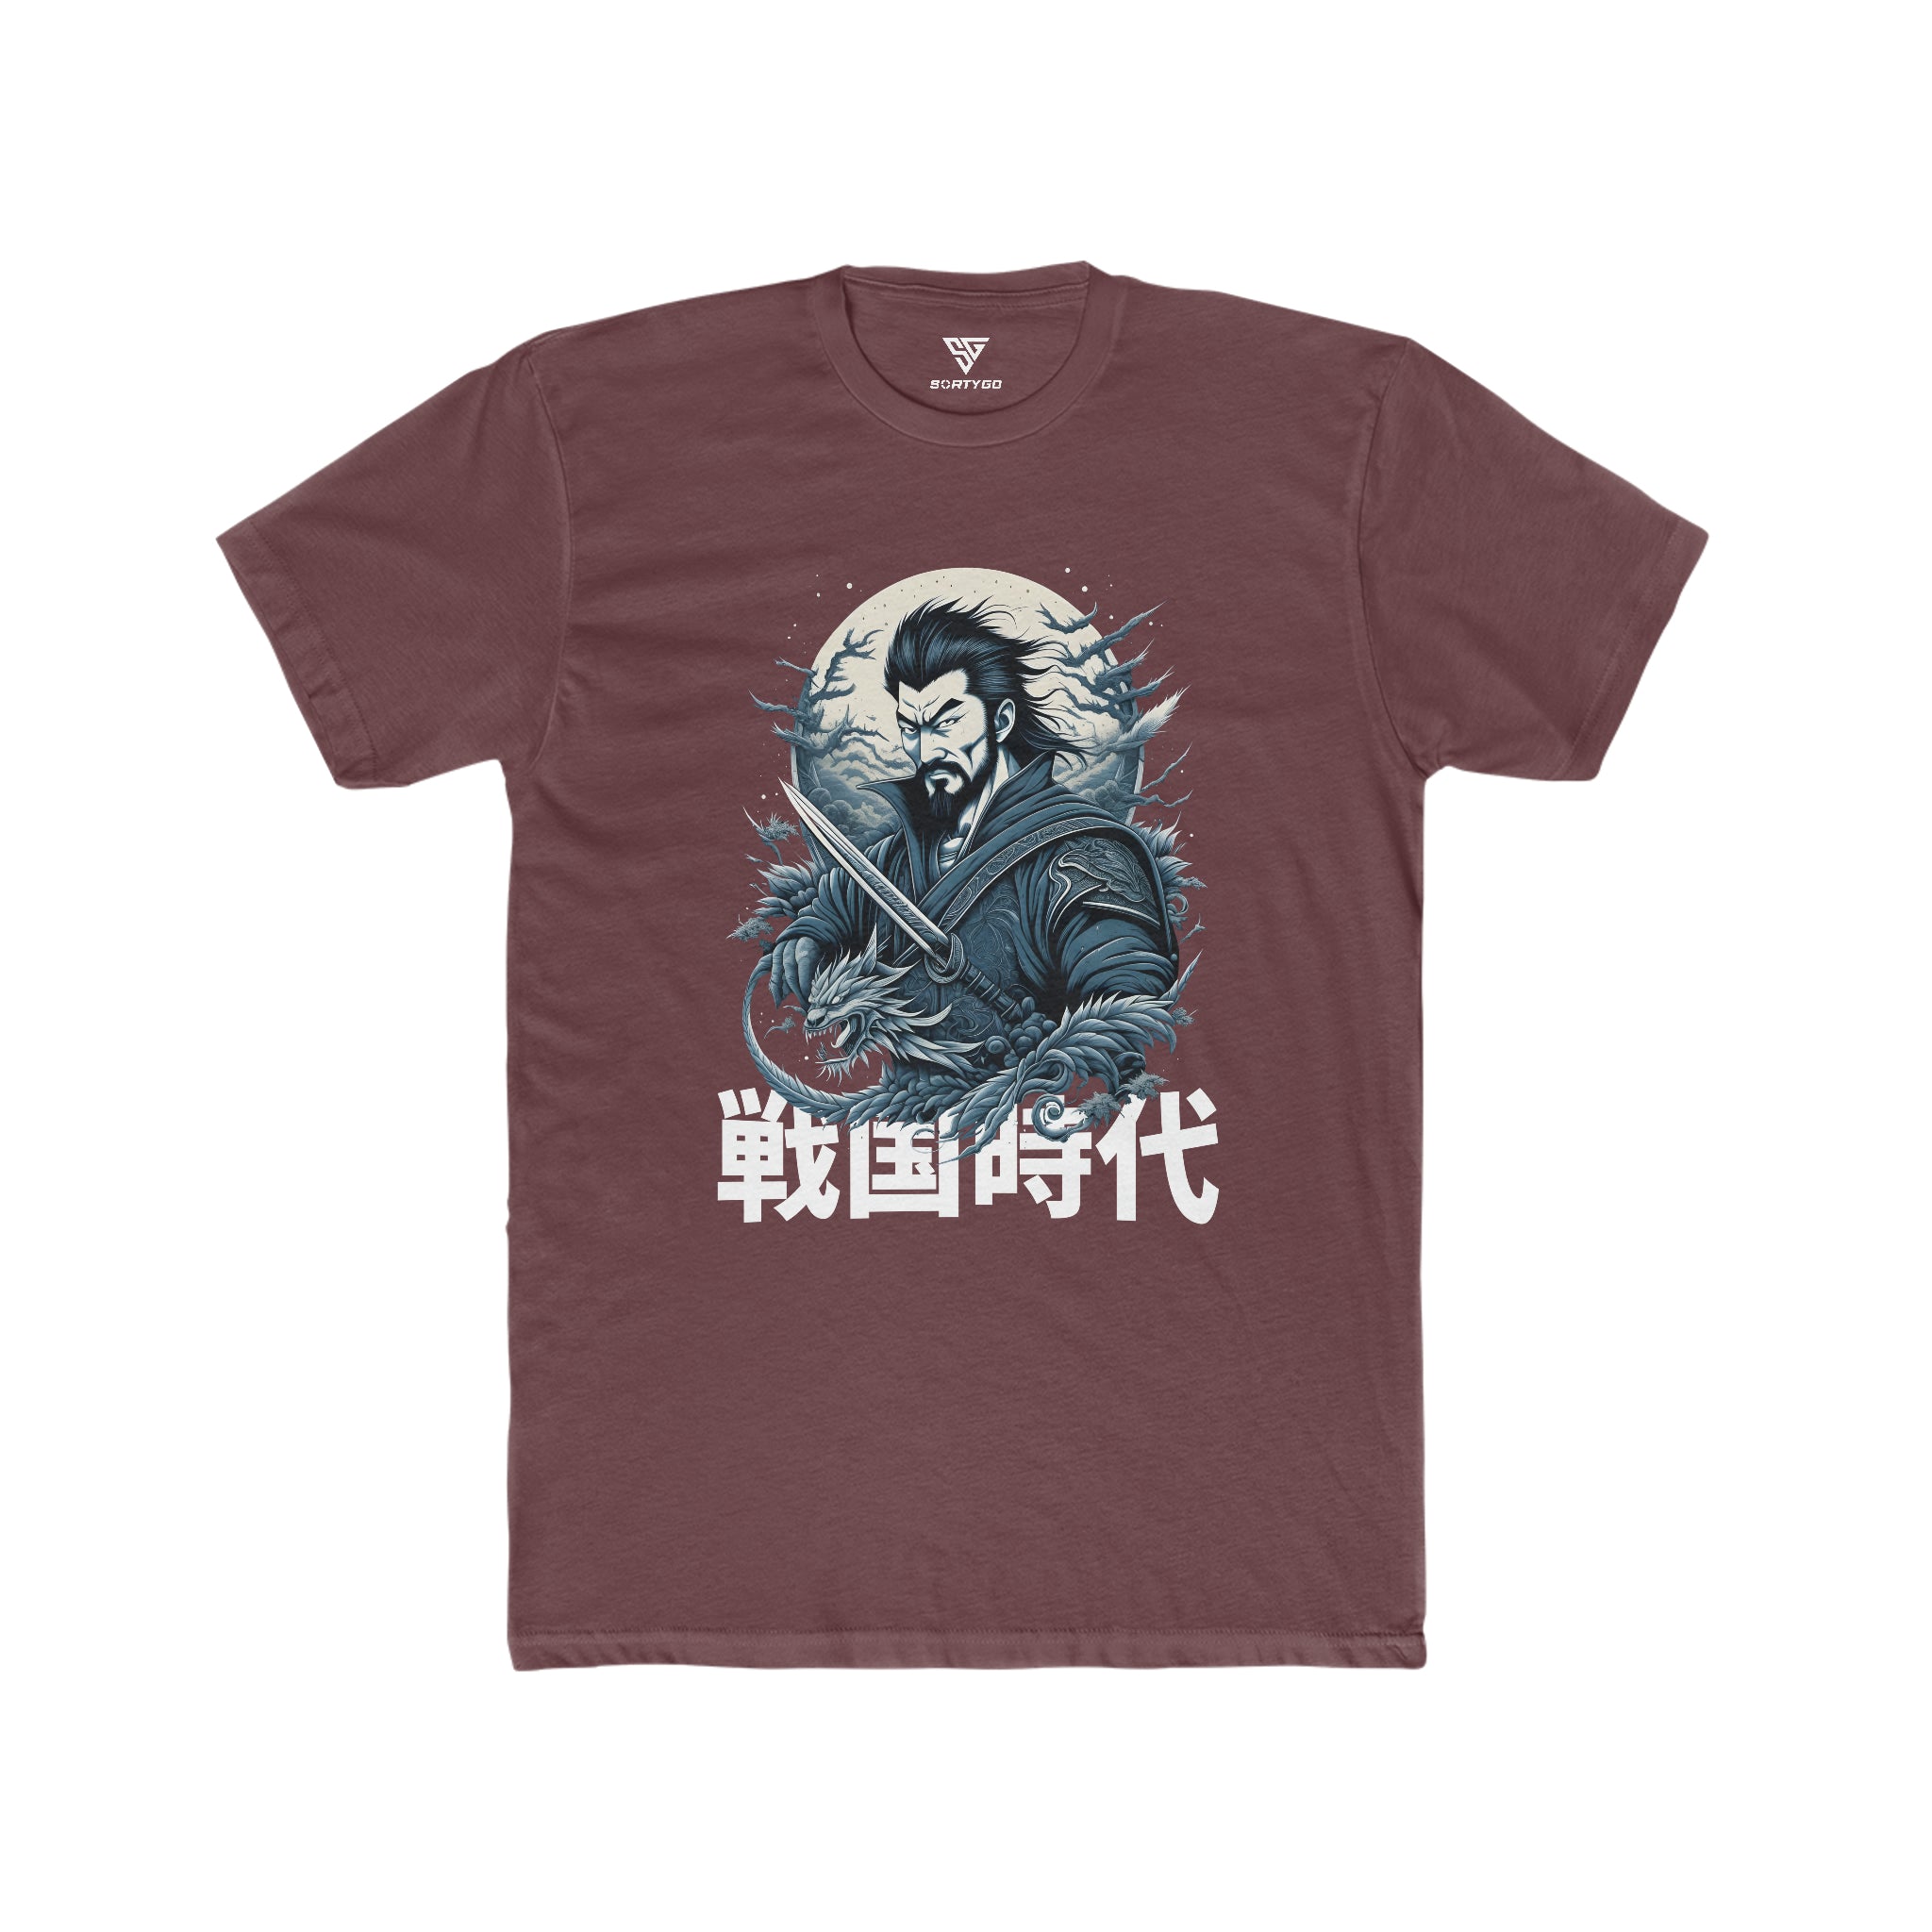 SORTYGO - Japanese Warrior Men Fitted T-Shirt in Solid Maroon